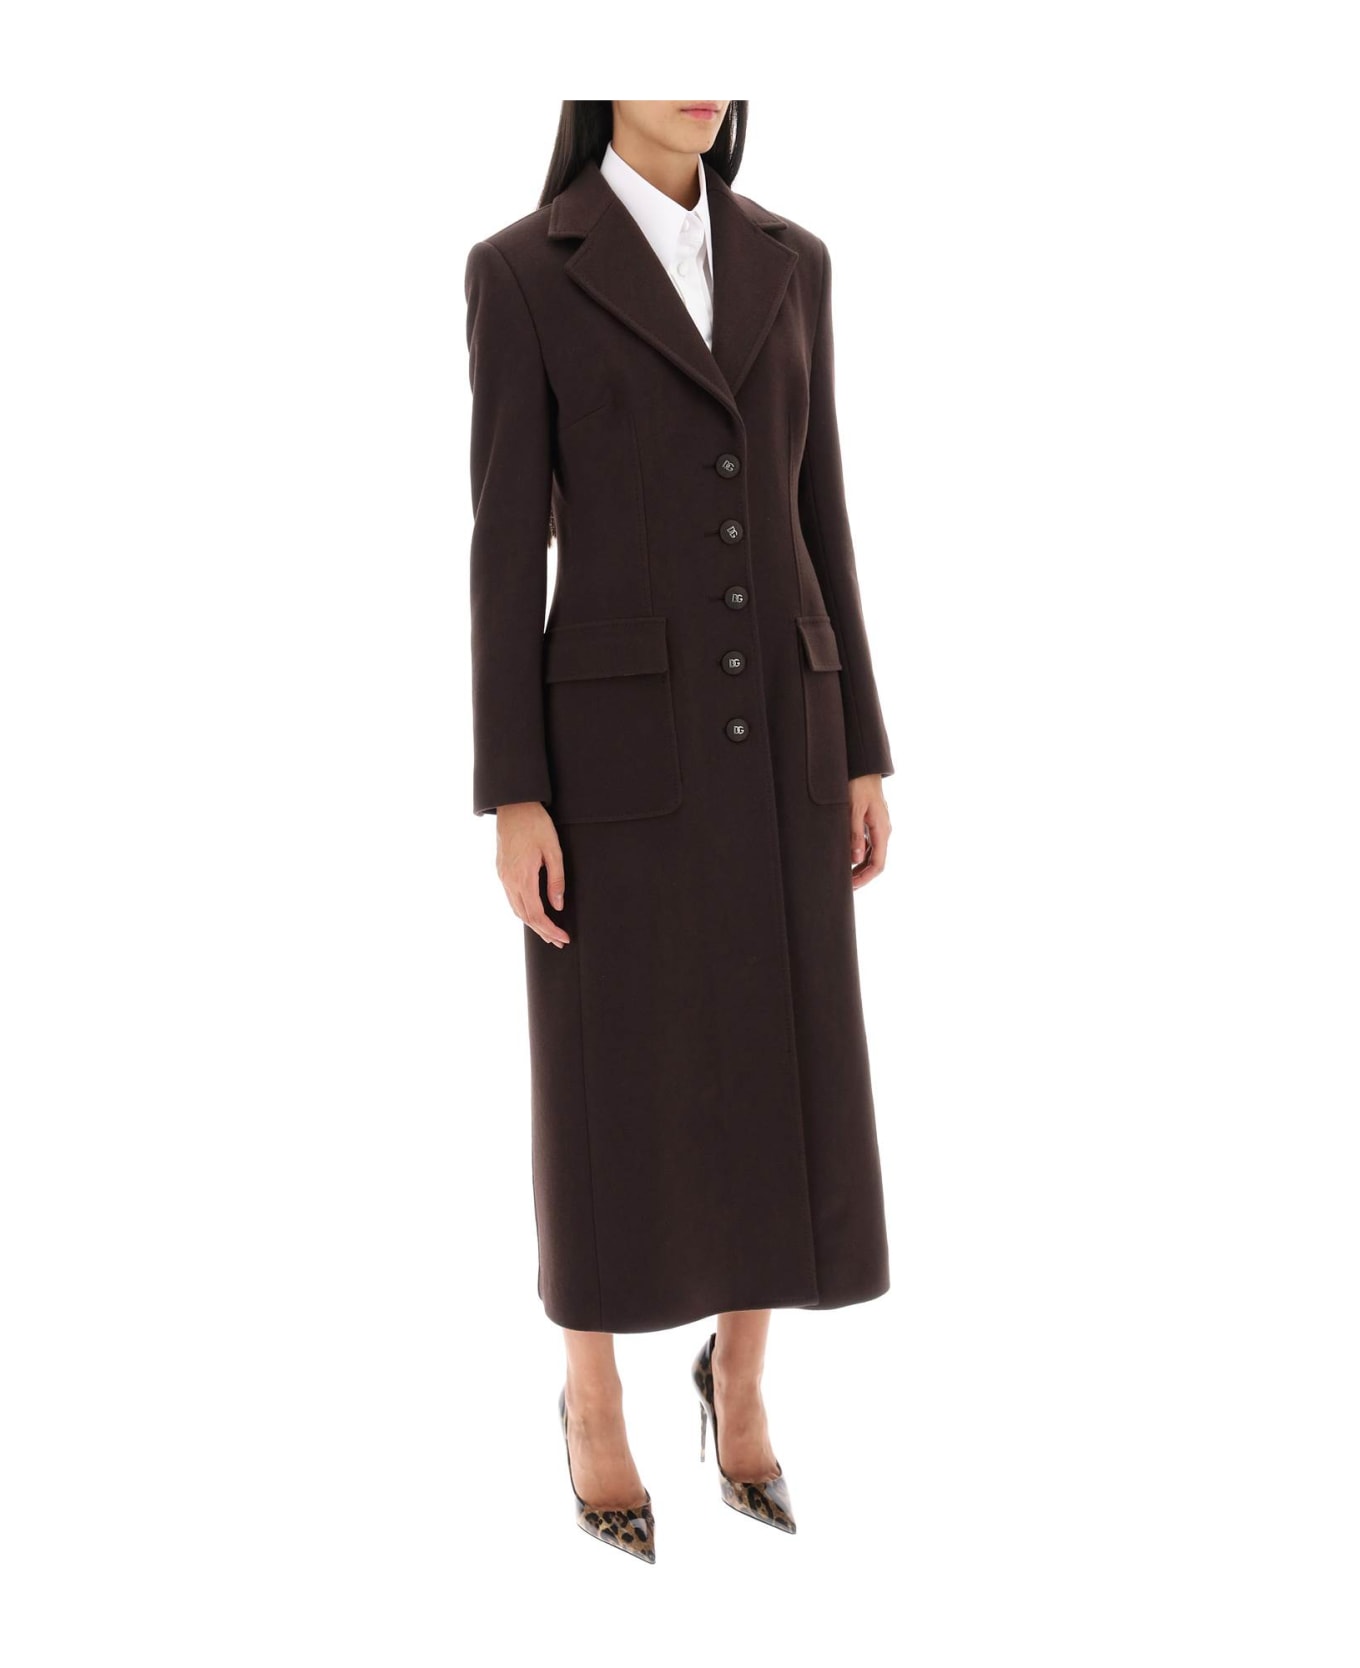 Dolce & Gabbana Shaped Coat In Wool And Cashmere - Marrone Scuro 4